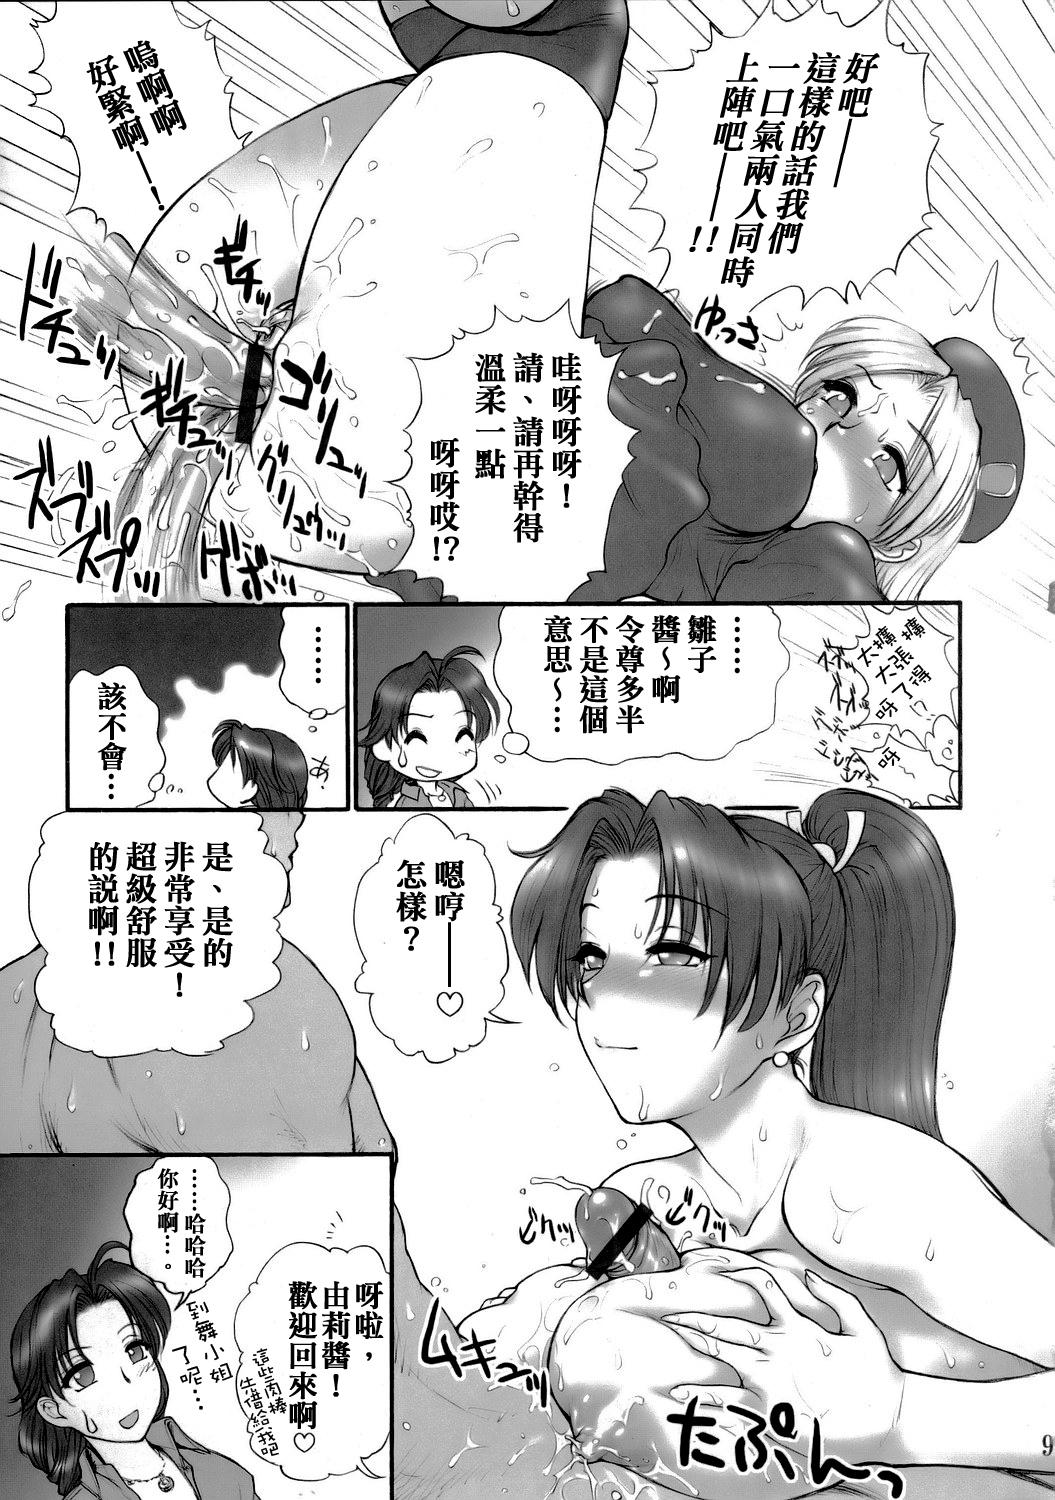 Work (SC29) [Shinnihon Pepsitou (St. Germain-sal)] Report Concerning Kyoku-gen-ryuu (The King of Fighters) [Chinese] [日祈漢化] - King of fighters Doctor Sex - Page 11